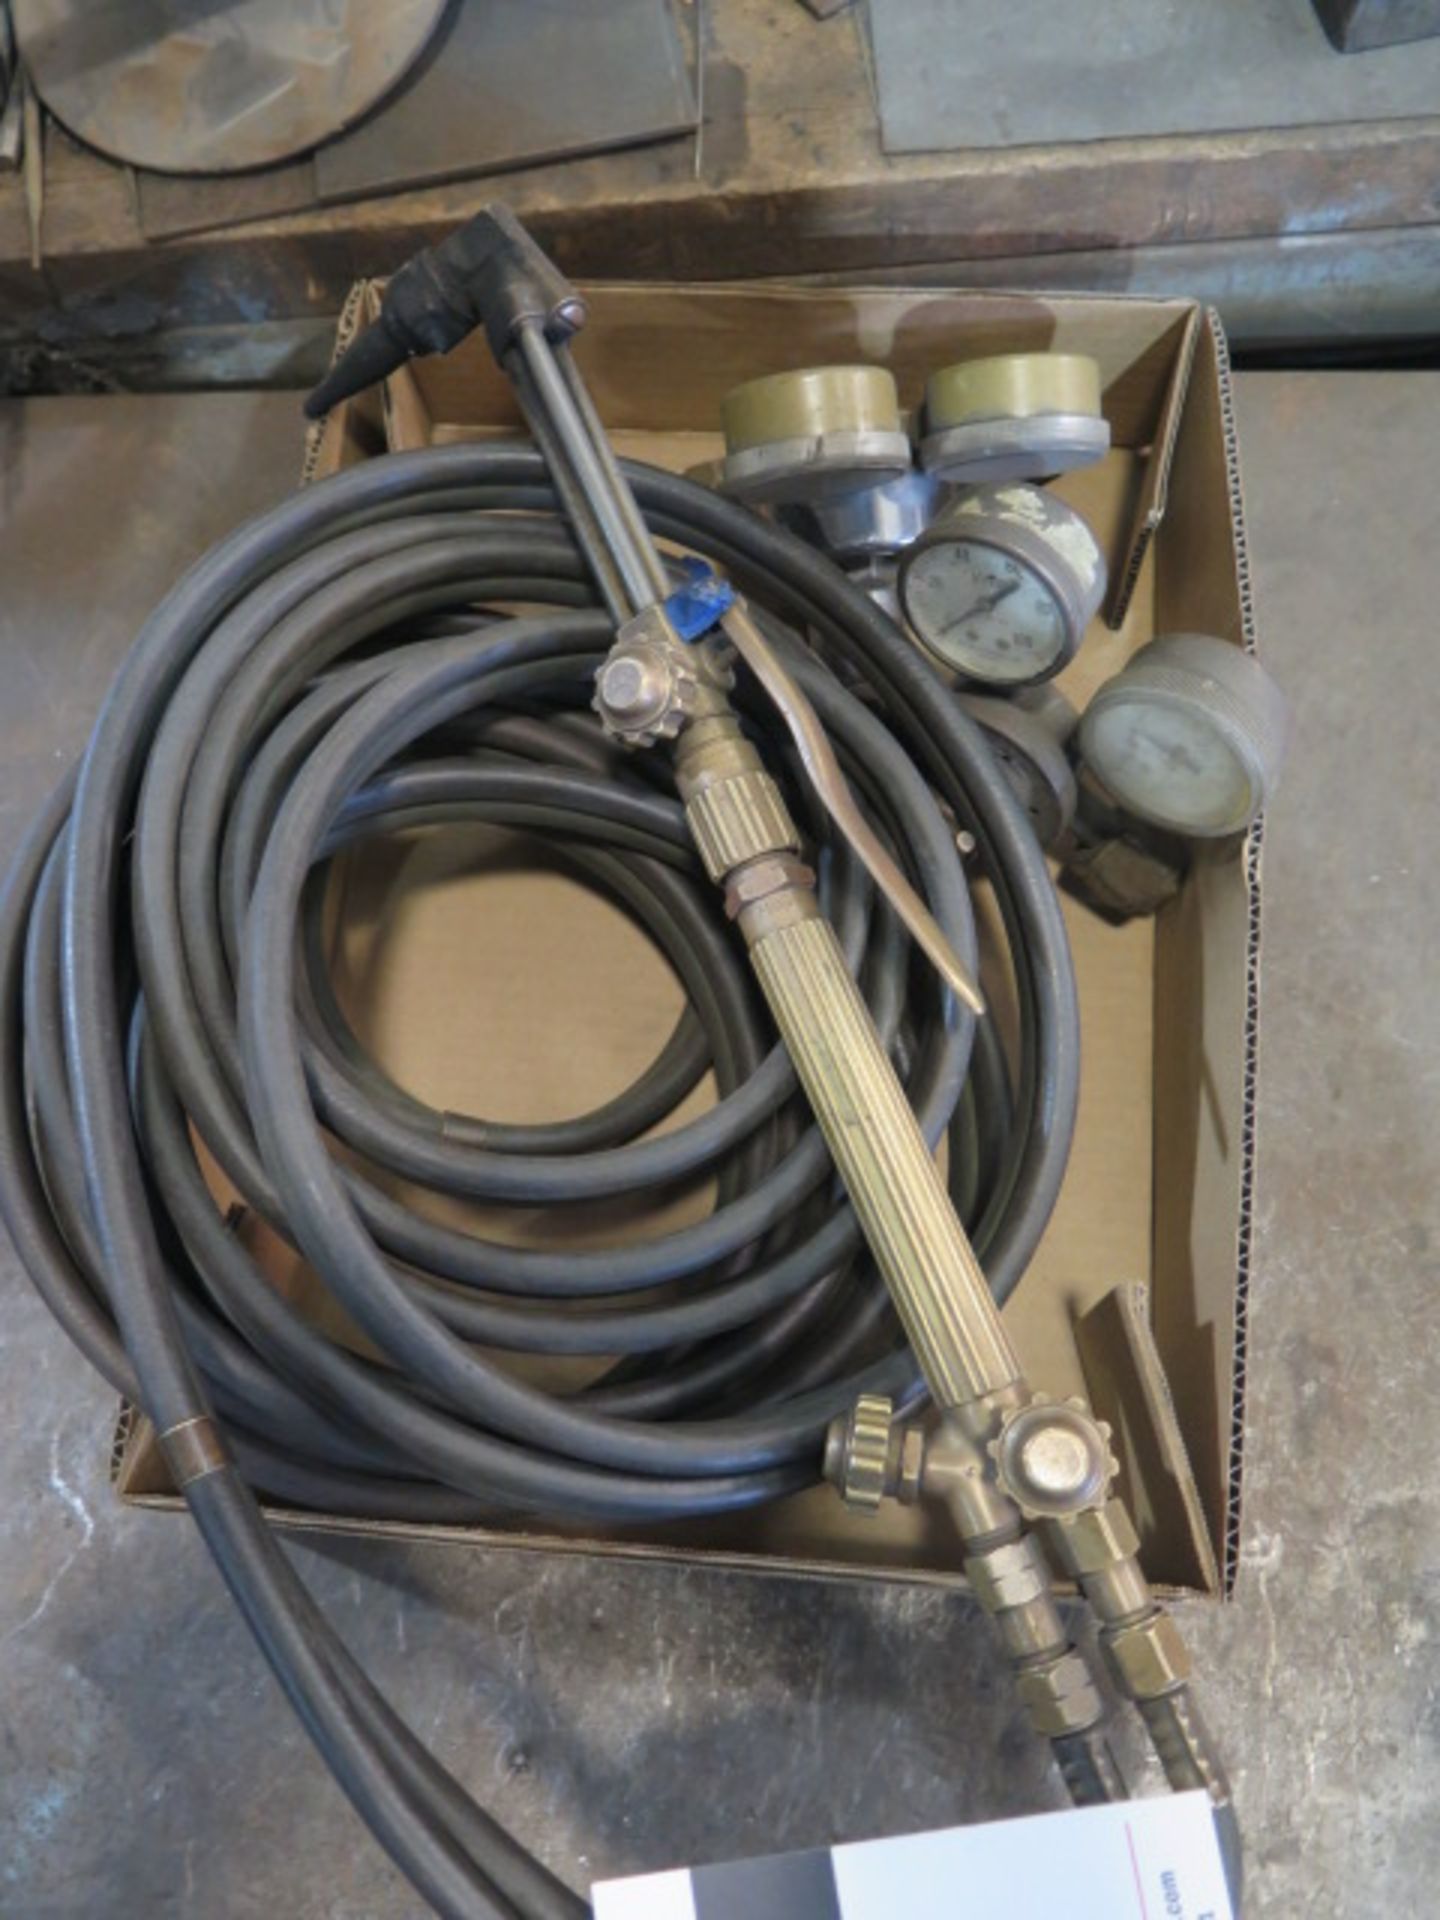 Welding Torch Gauges Hose and Handle - Image 2 of 2